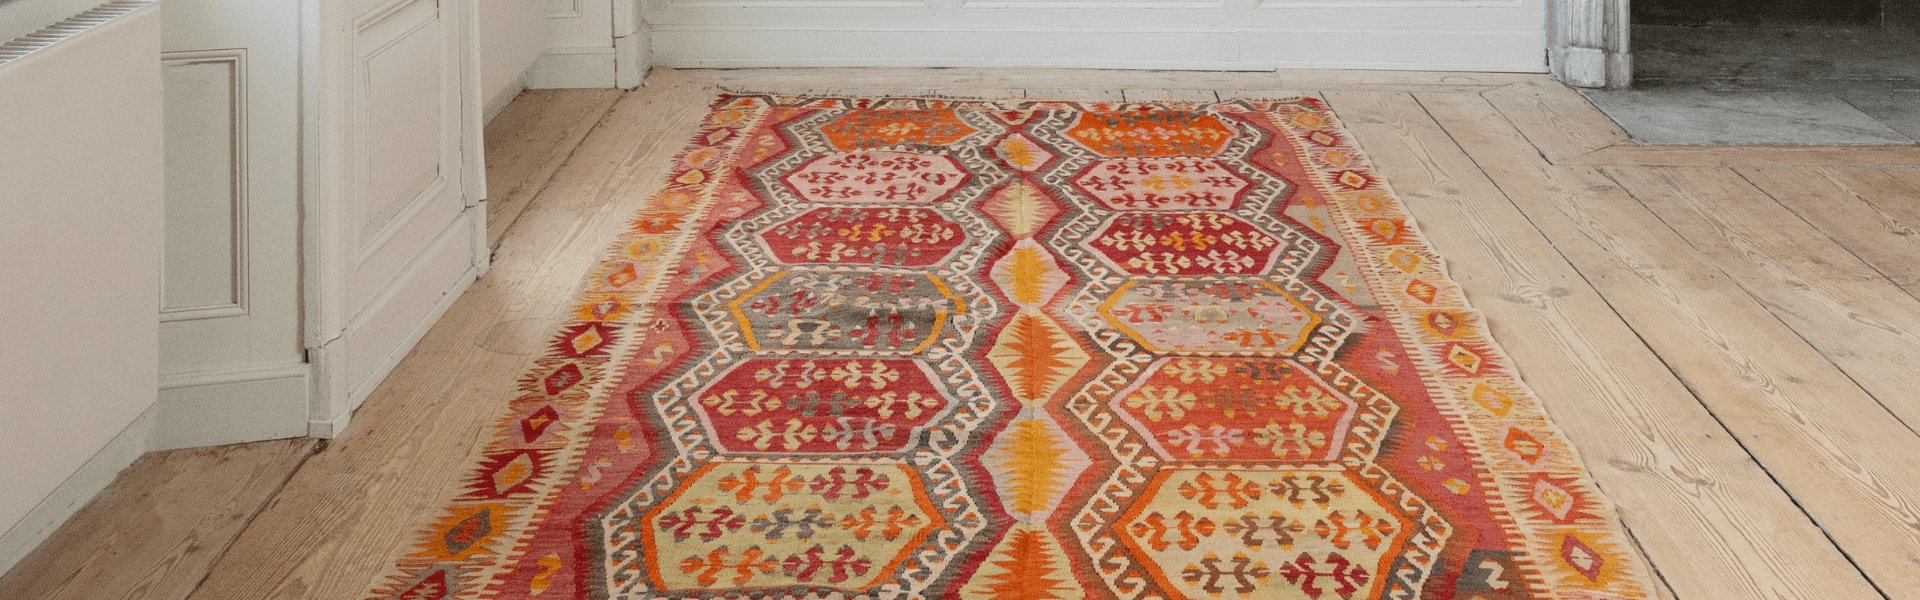 New vintage kilims in store